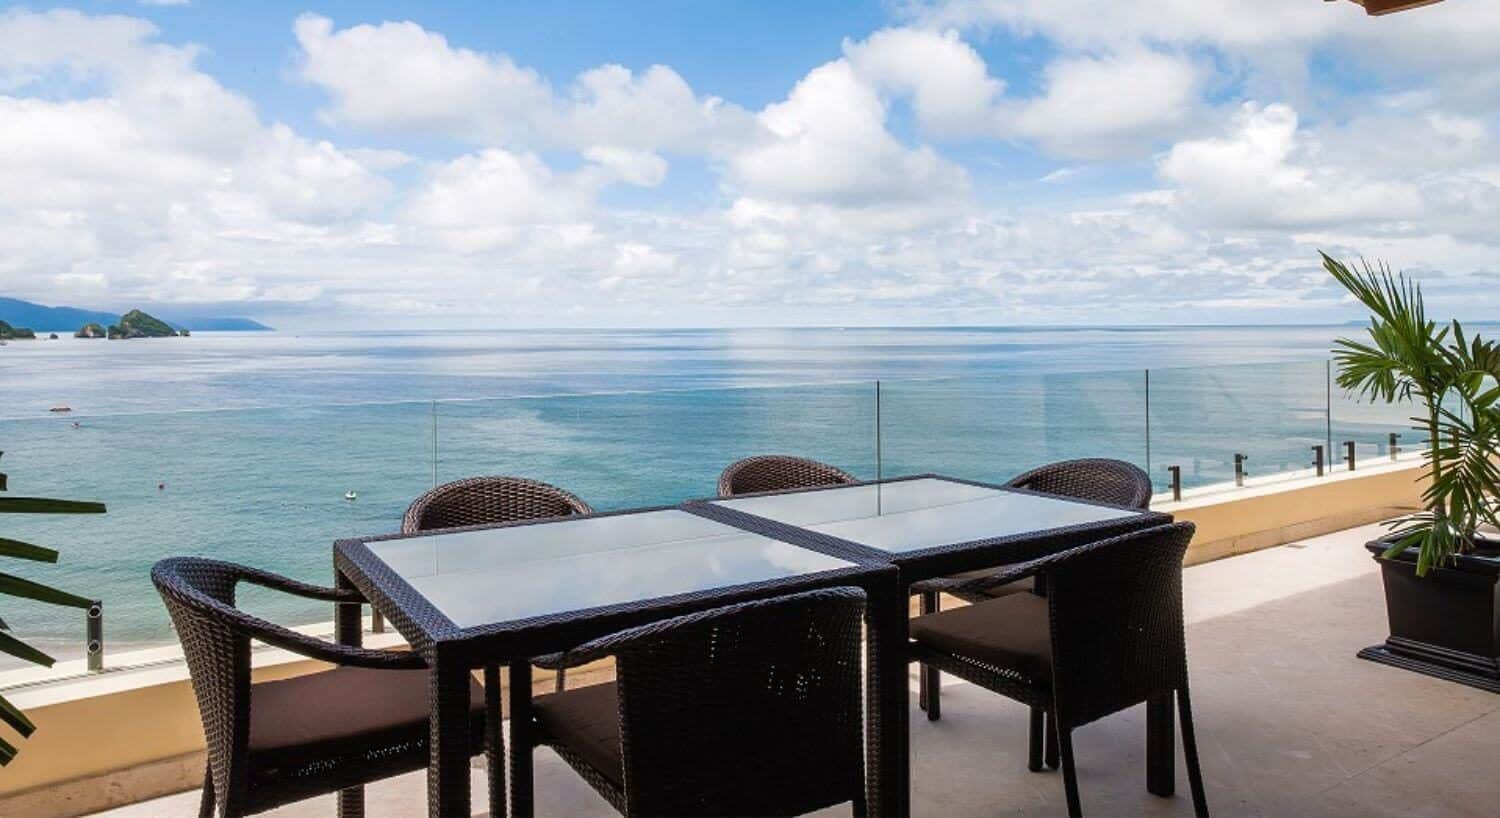 A private outdoor patio with table and chairs and views of Banderas Bay